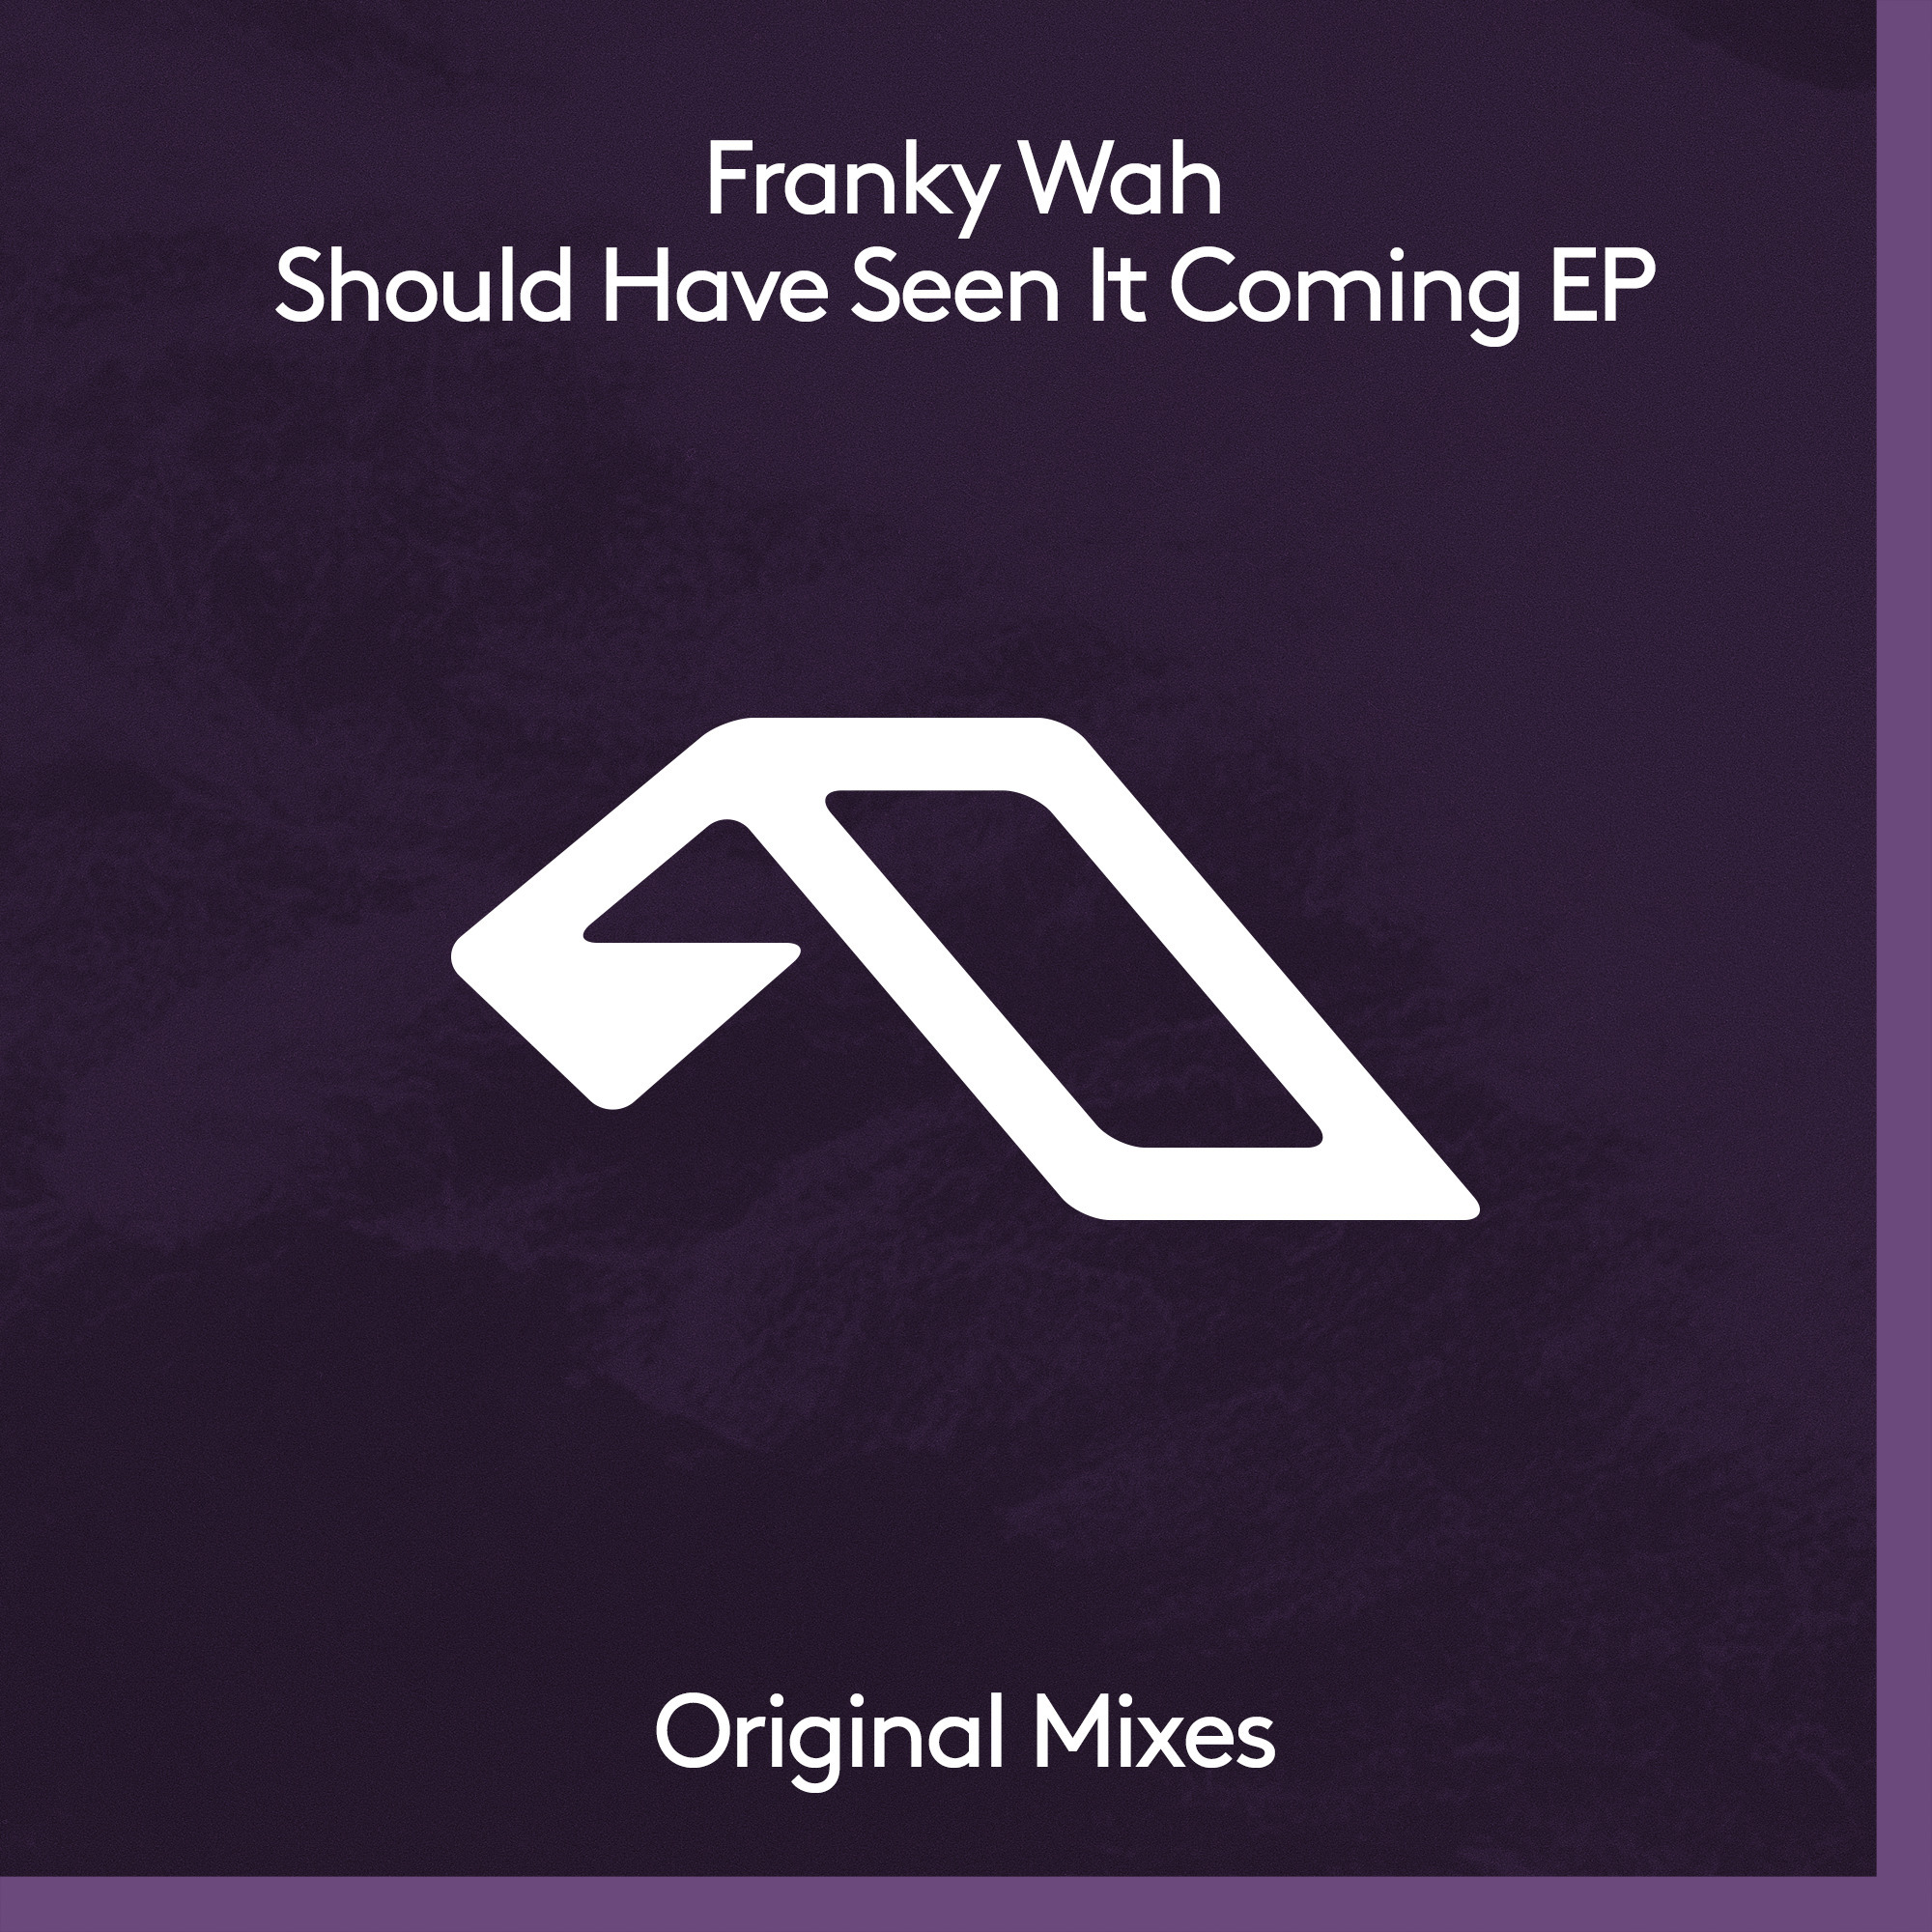 Franky Wah Should Have Seen It Coming EP cover artwork